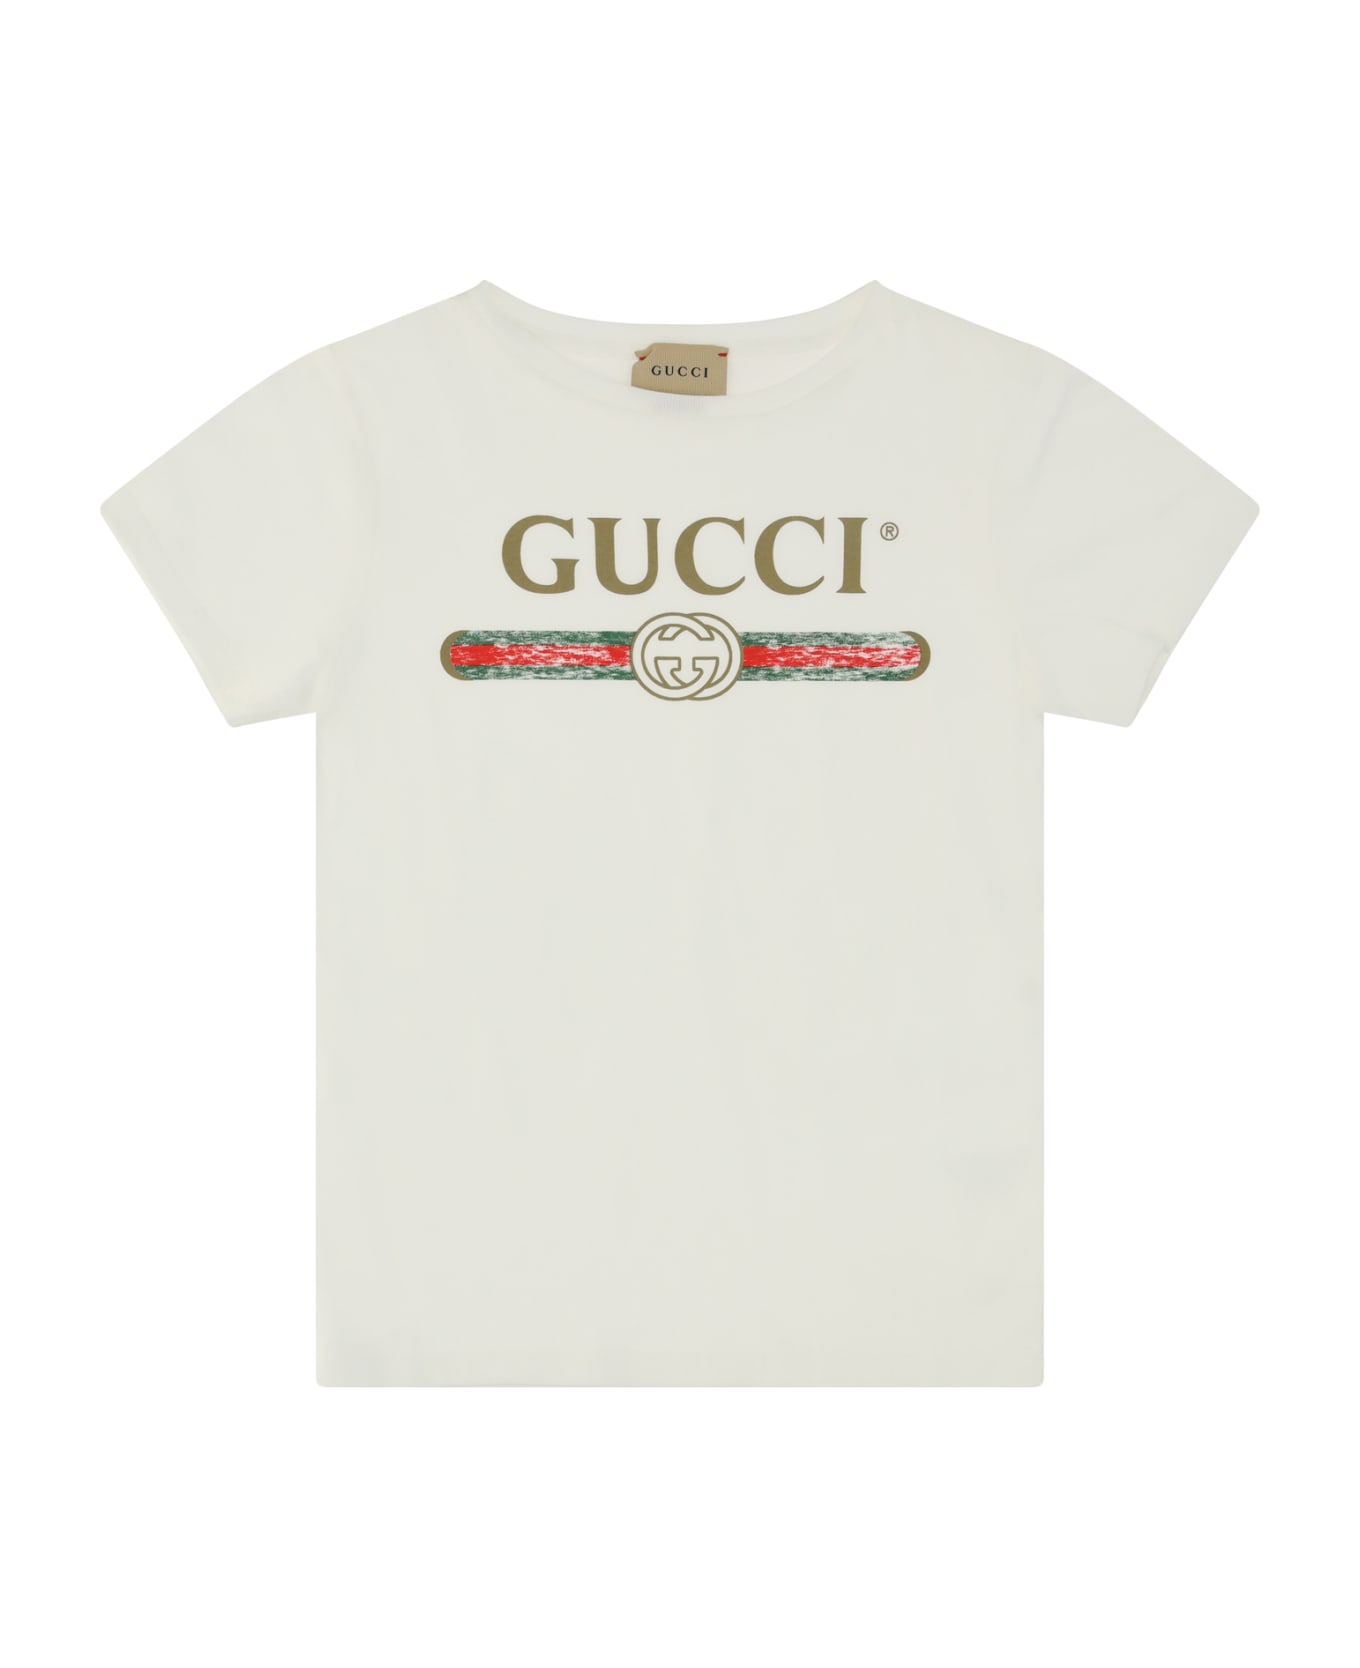 Gucci T-shirt For Boy - White トップス